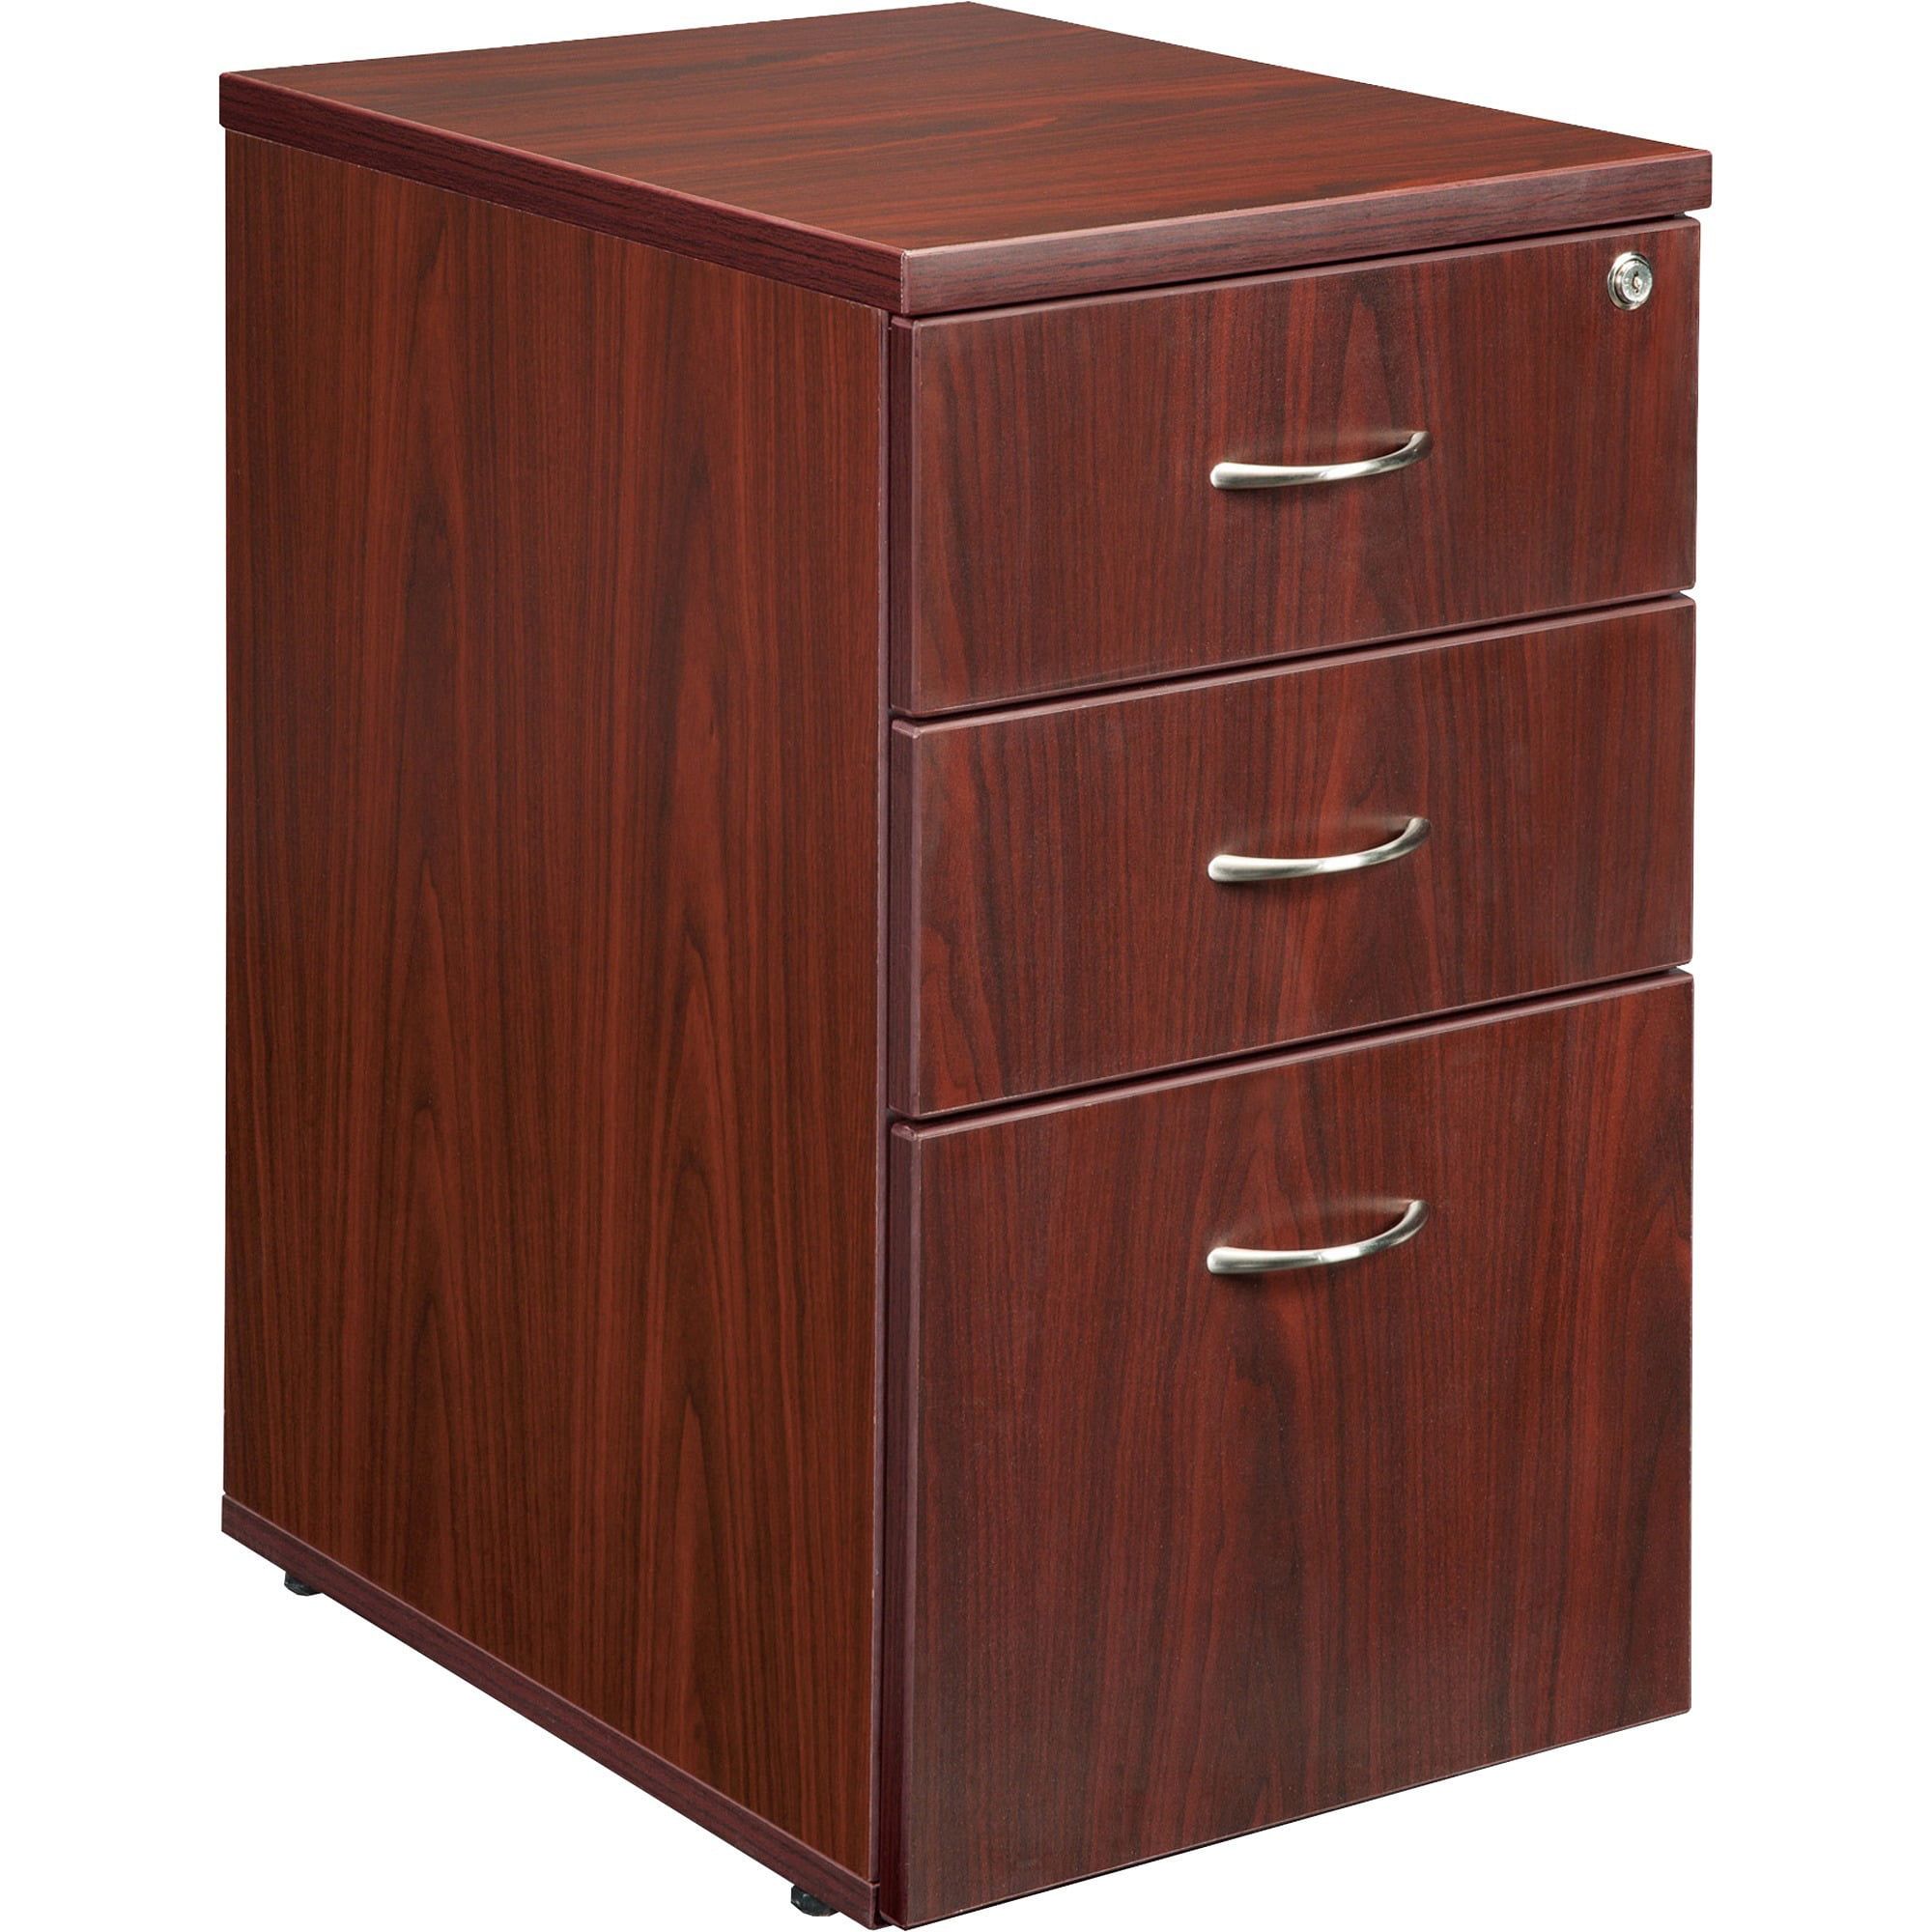 3 Drawers Vertical Wood Composite Lockable Filing Cabinet, – Walmart Pertaining To Wood Cabinet With Drawers (Gallery 13 of 20)